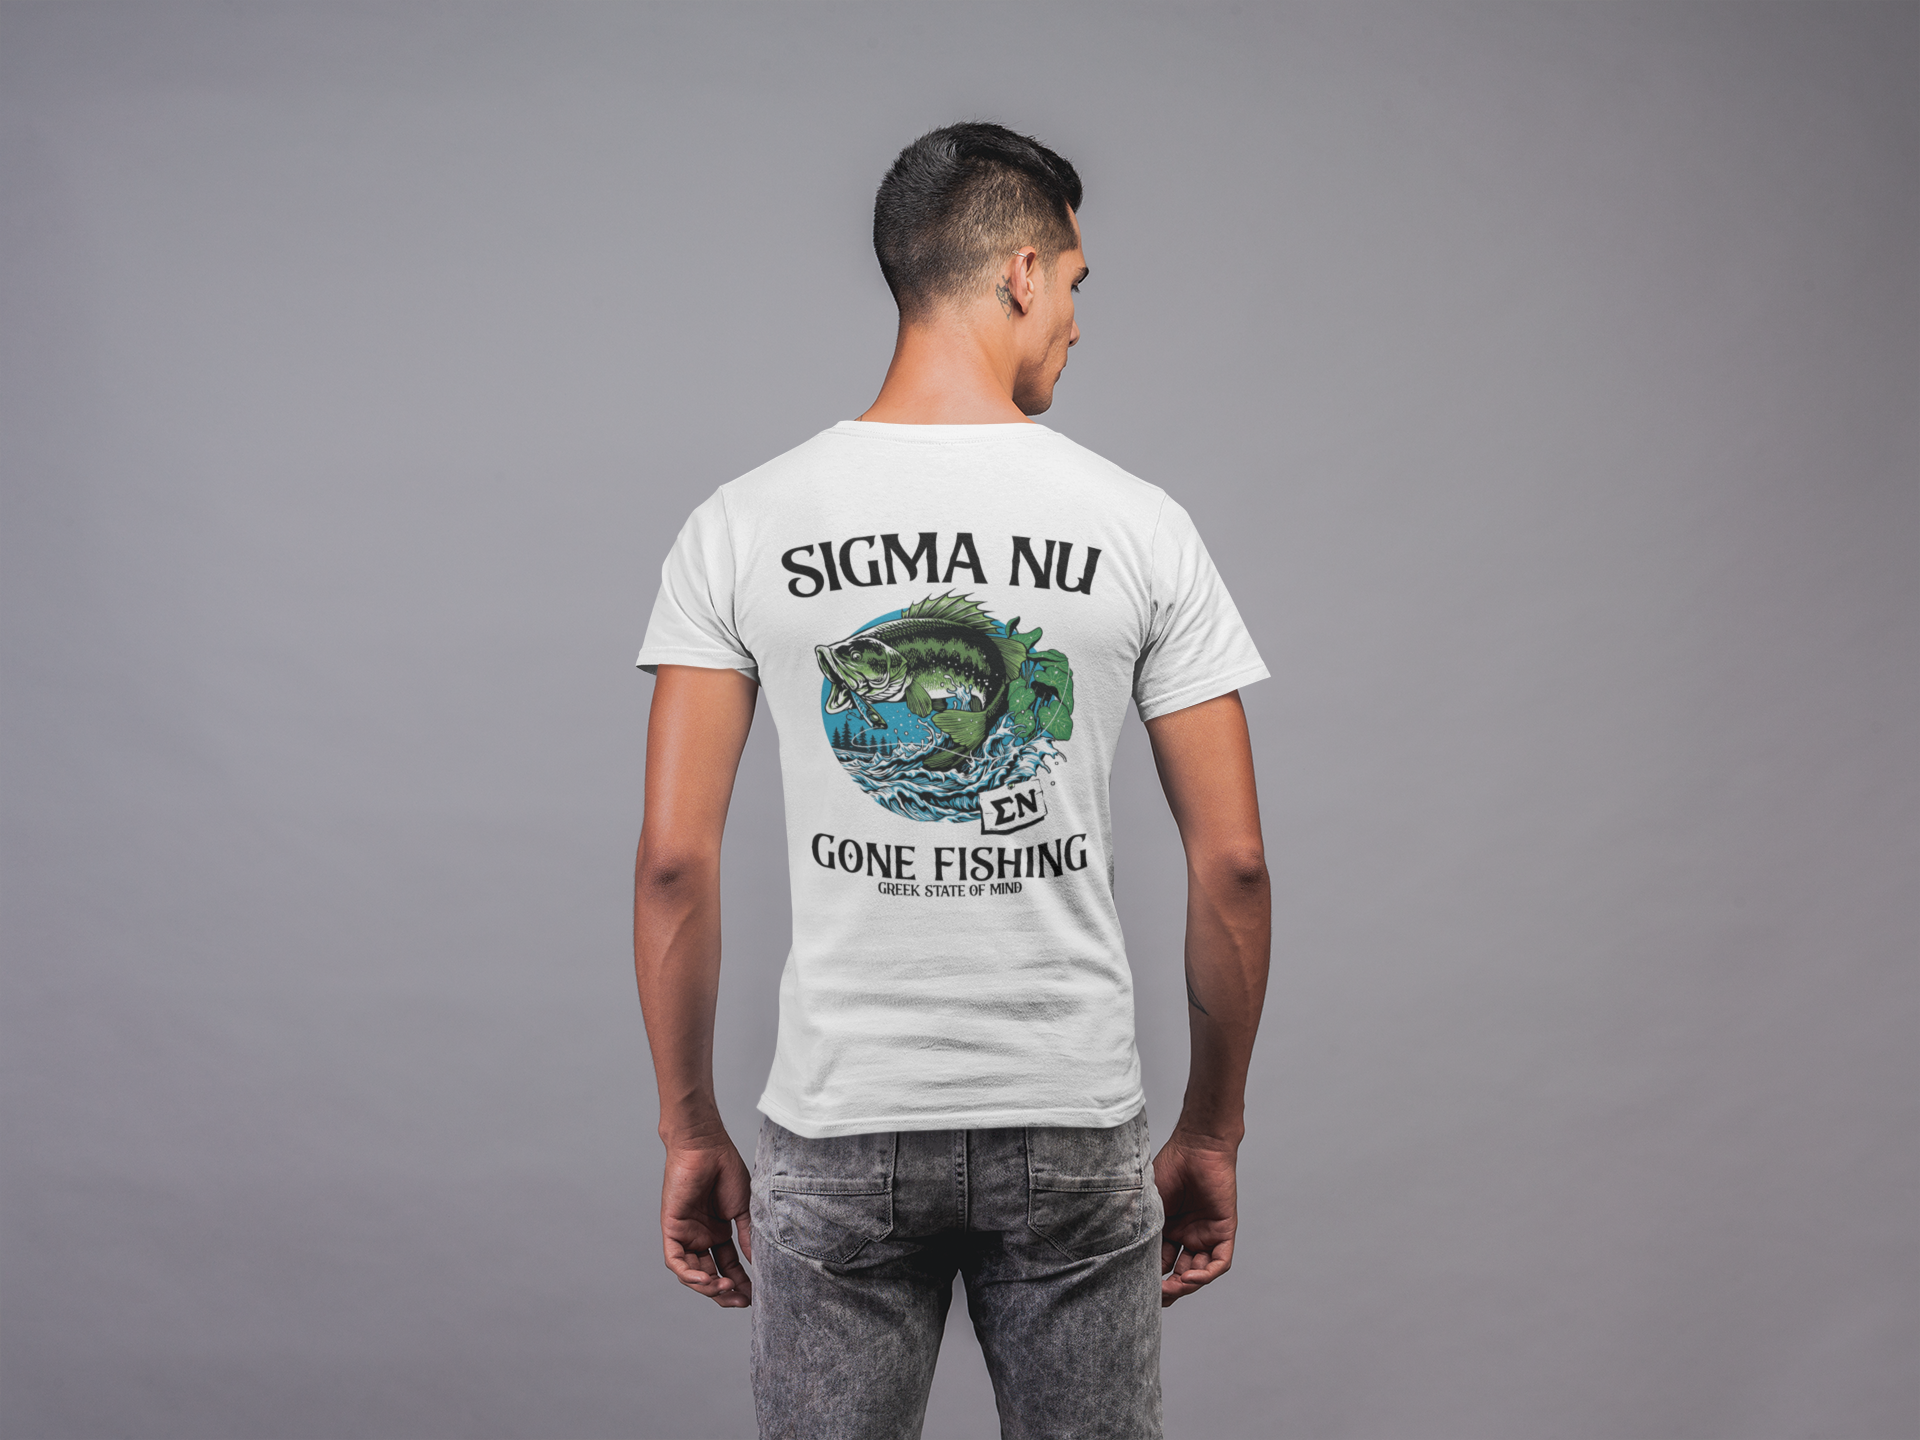 Sigma Nu Graphic T-Shirt | Gone Fishing | Sigma Nu Clothing, Apparel and Merchandise back model 